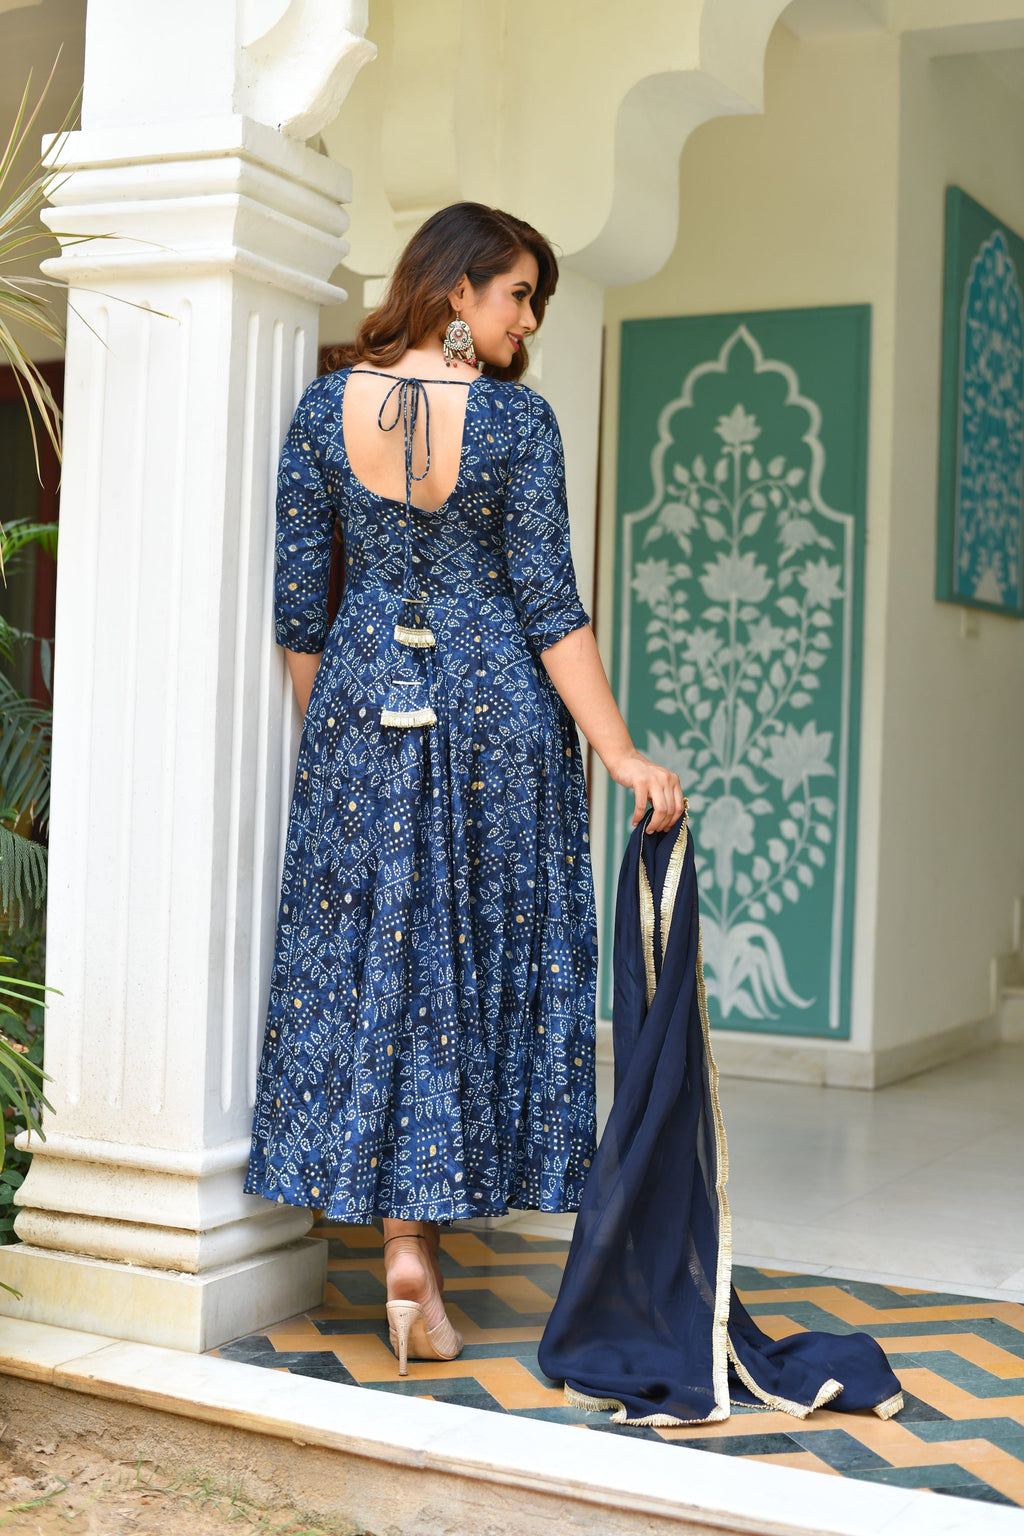 Bandhani Dress Archives | Fashionmate | Latest Fashion Trends in India